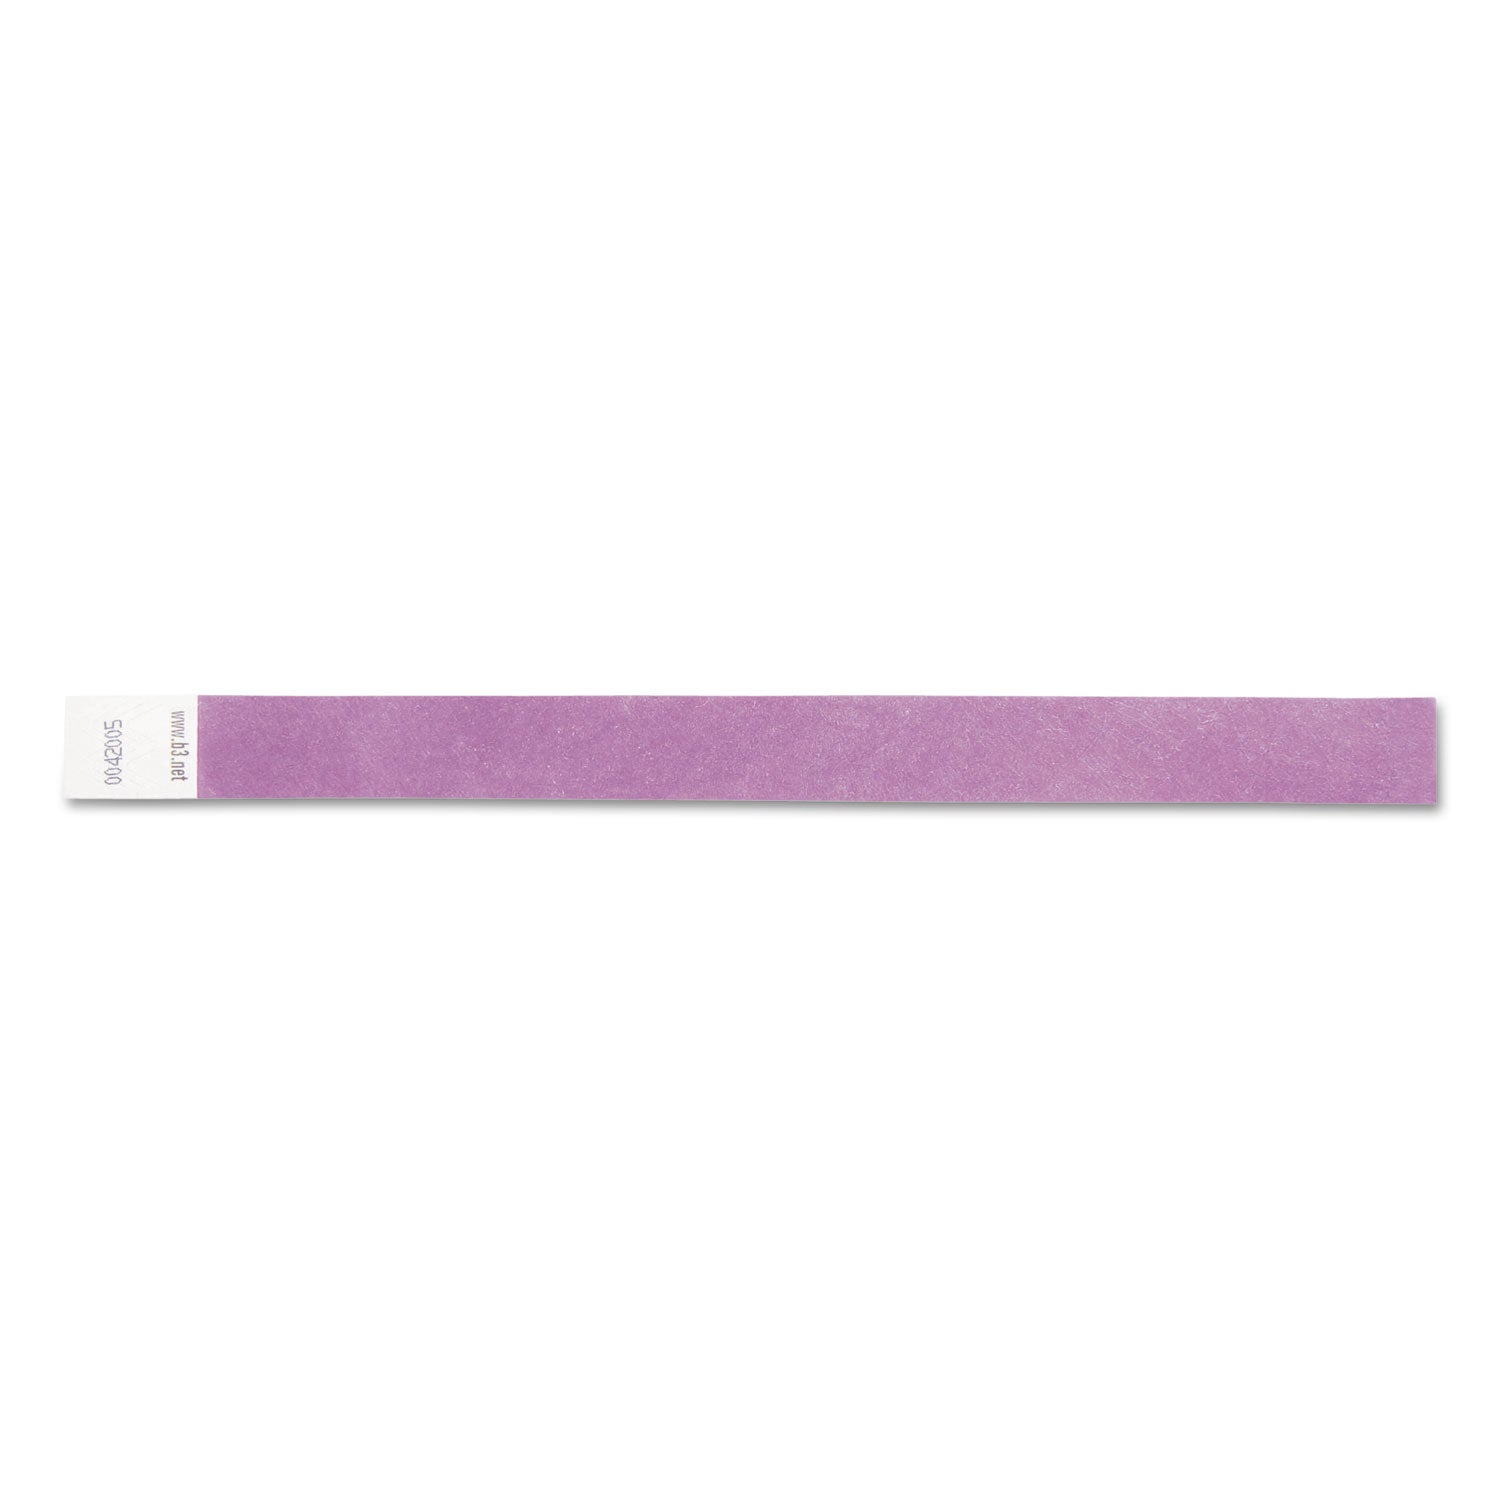 Security Wristbands, Sequentially Numbered, 10" x 0.75", Purple, 100/Pack - 